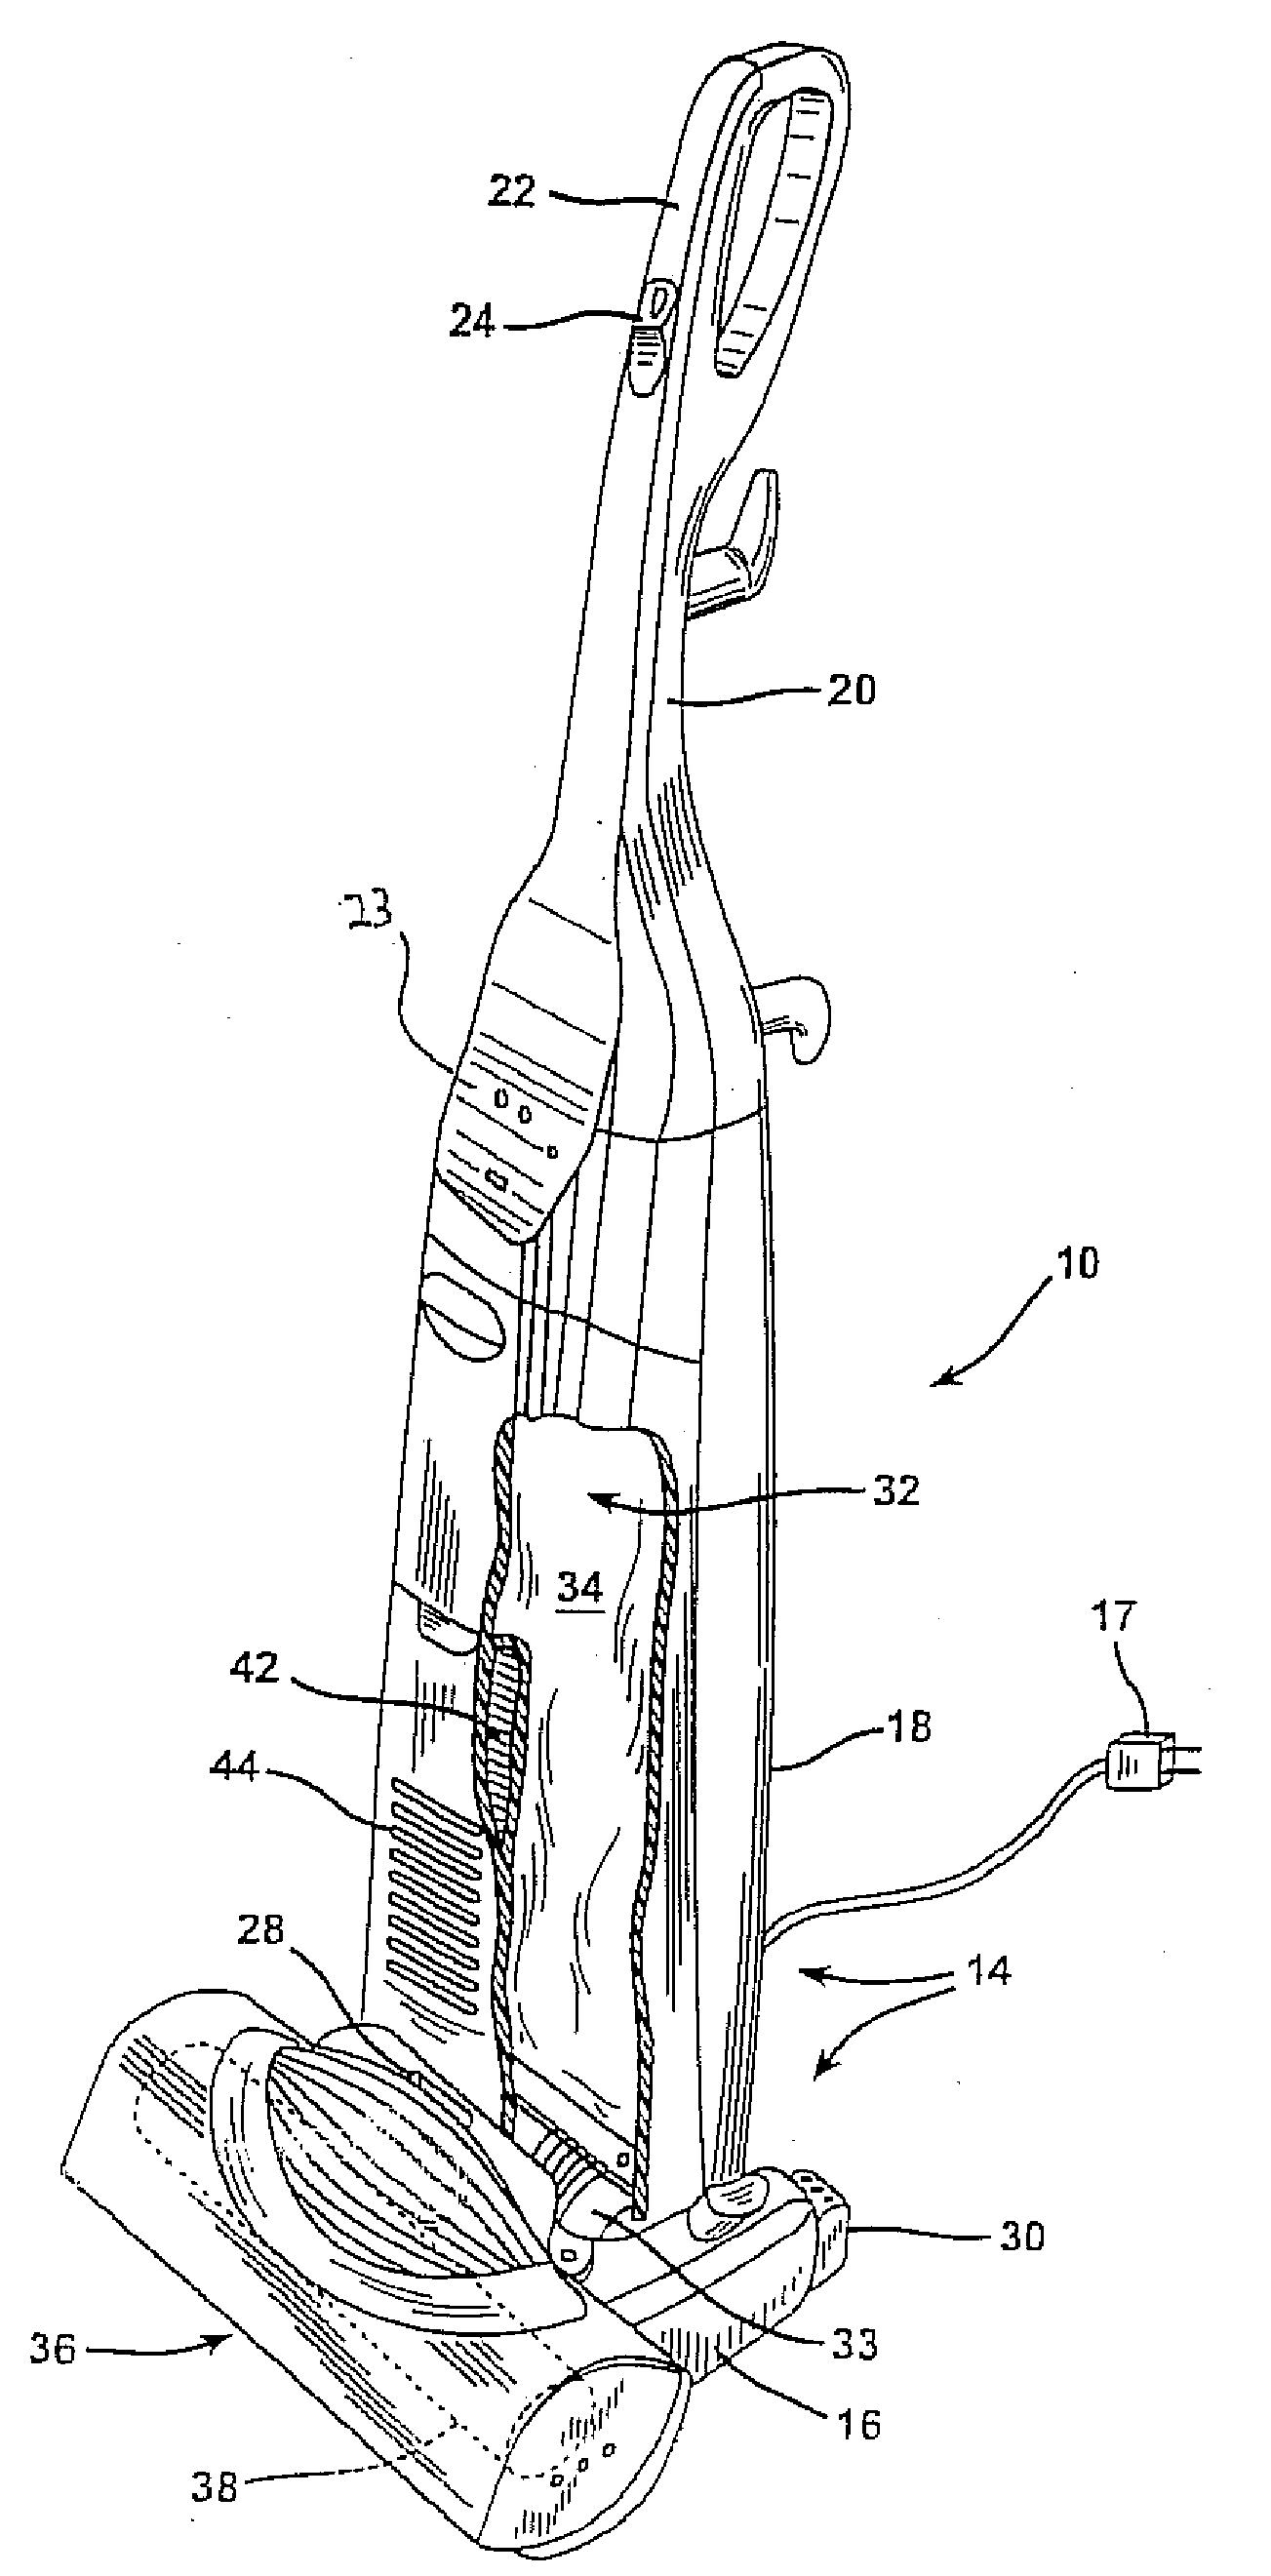 Self-cleaning filter arrangement with activation signal for floor care apparatus